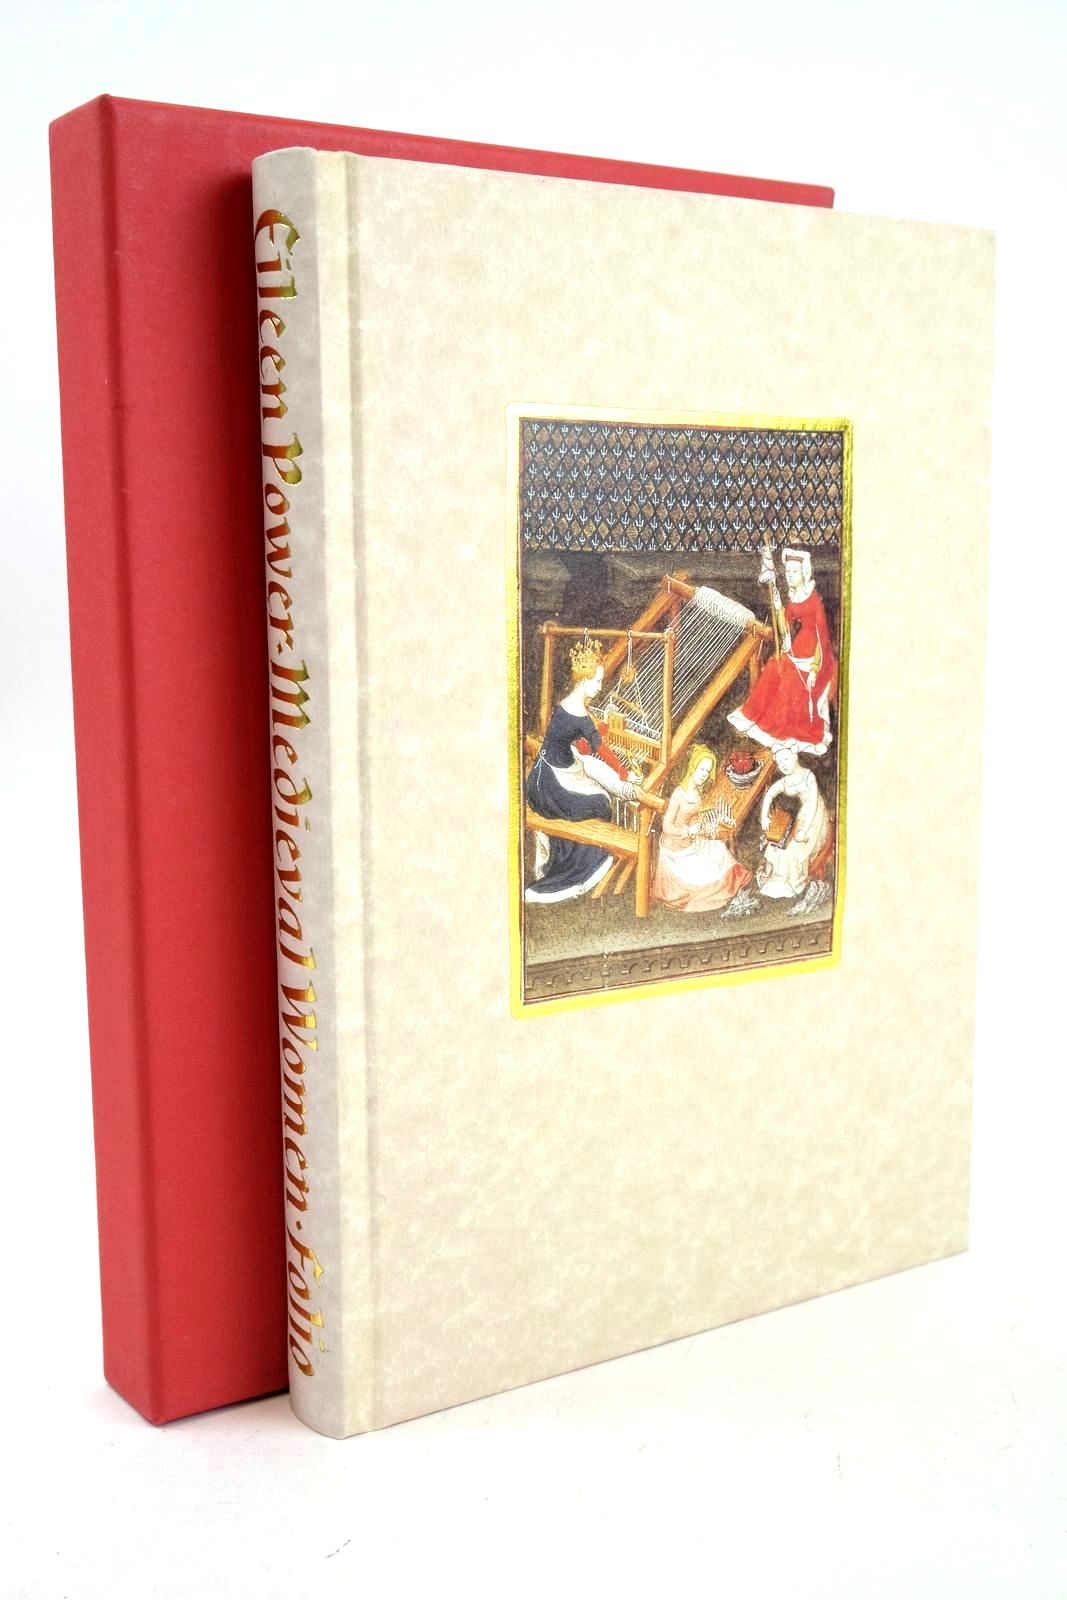 Photo of MEDIEVAL WOMEN written by Power, Eileen Ladurie, Emmanuel Le Roy Berg, Maxine Postan, M.M. published by Folio Society (STOCK CODE: 1326769)  for sale by Stella & Rose's Books